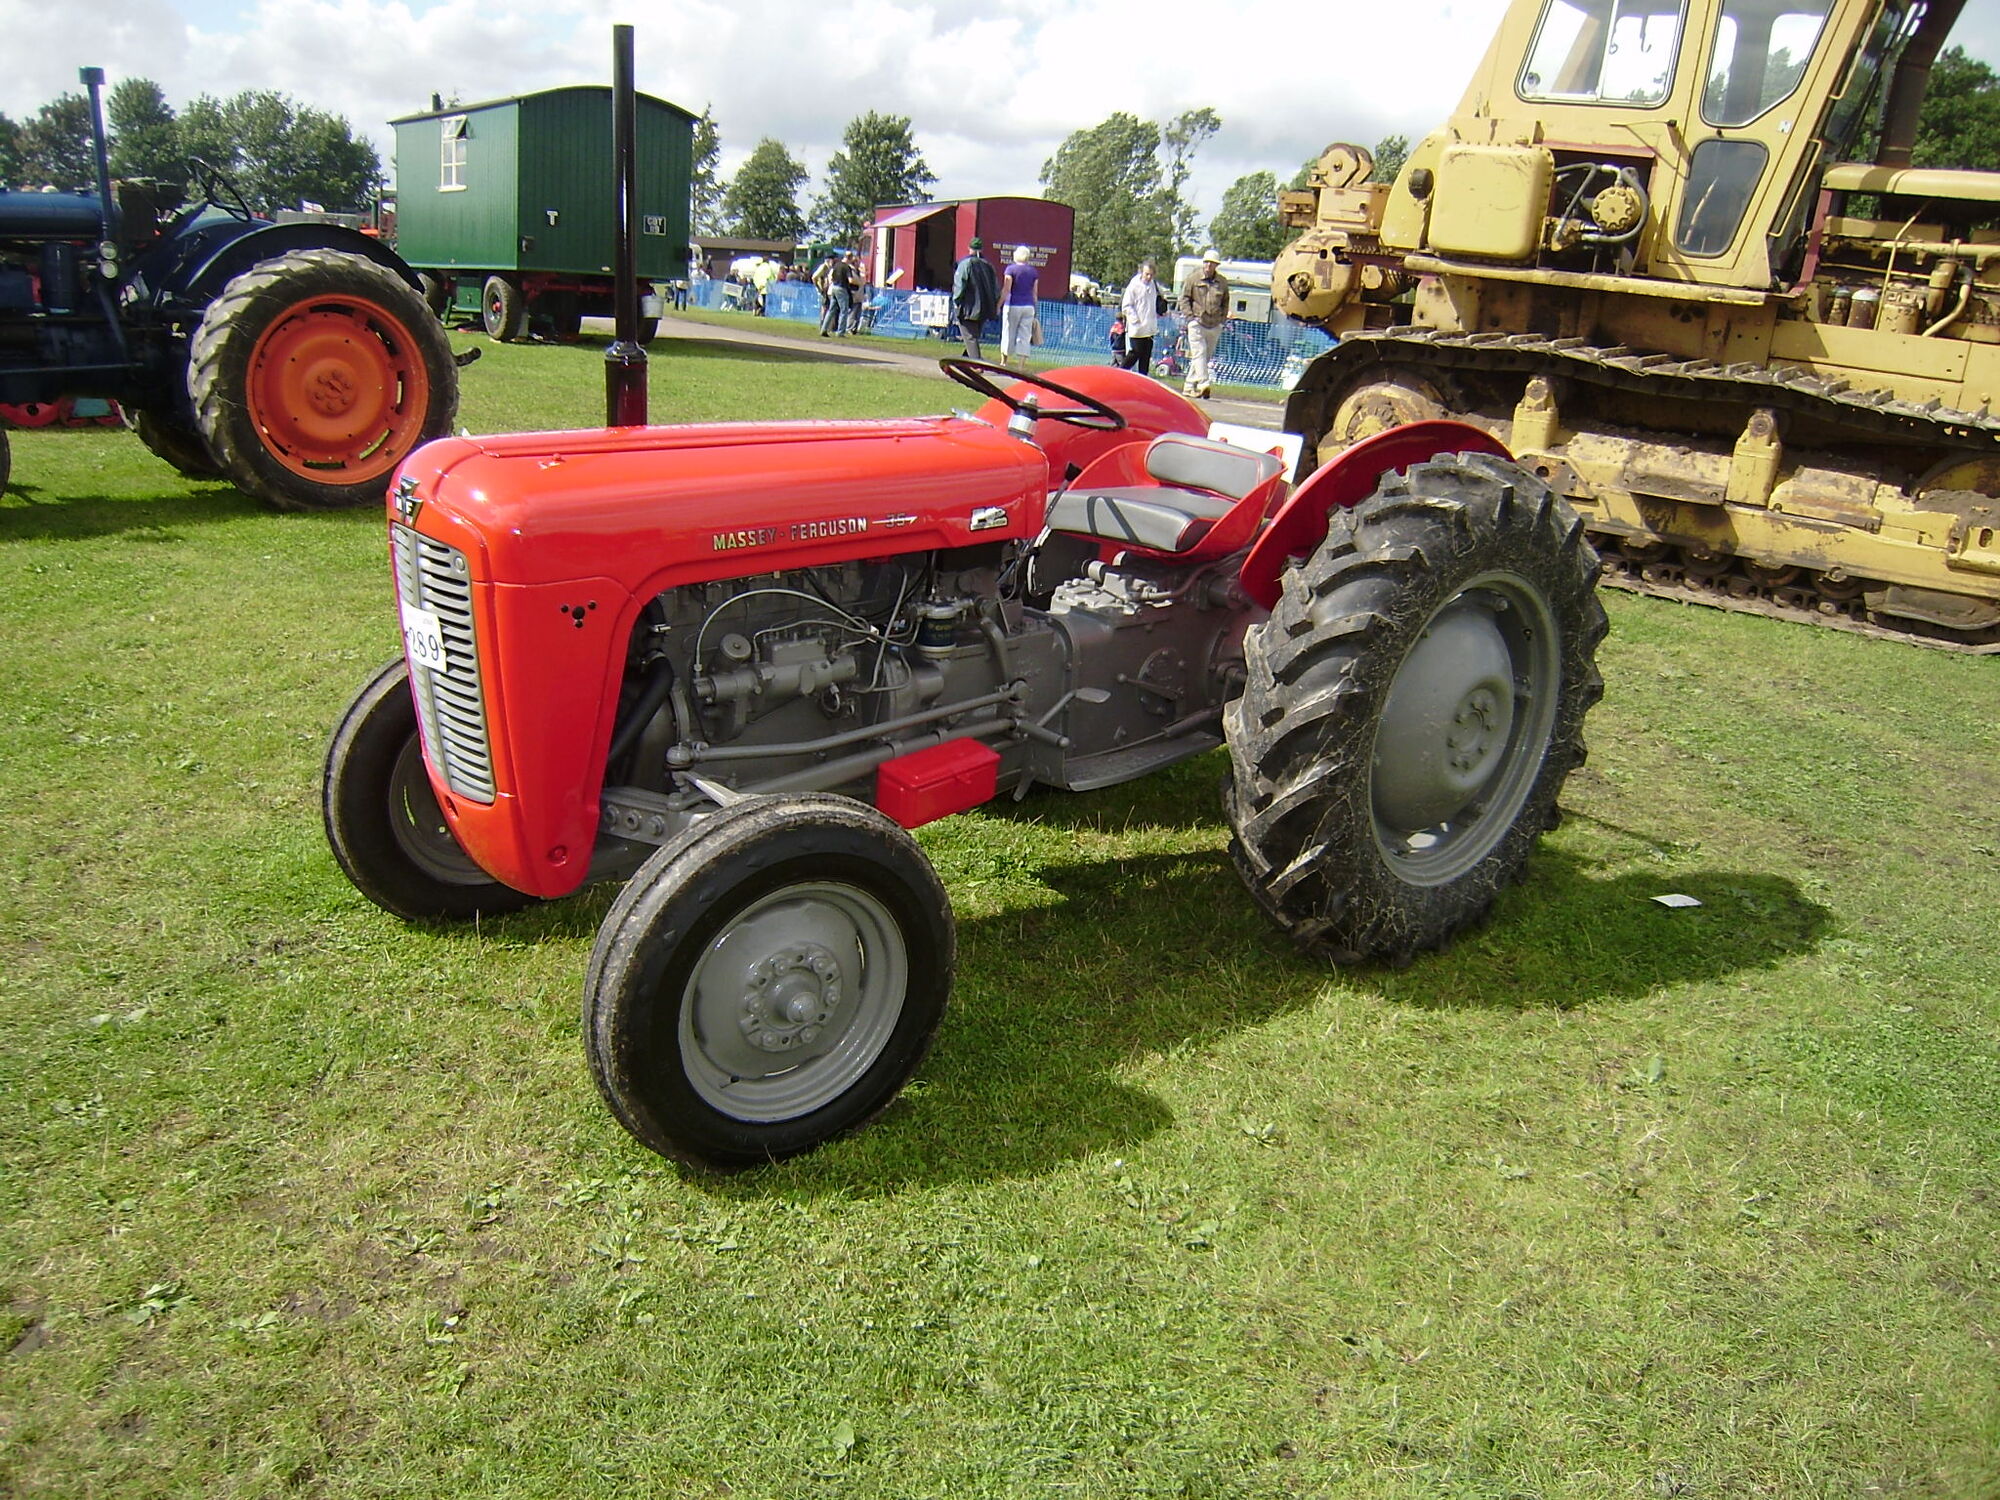 Massey Ferguson Products By Series Tractor Construction Plant Wiki Fandom